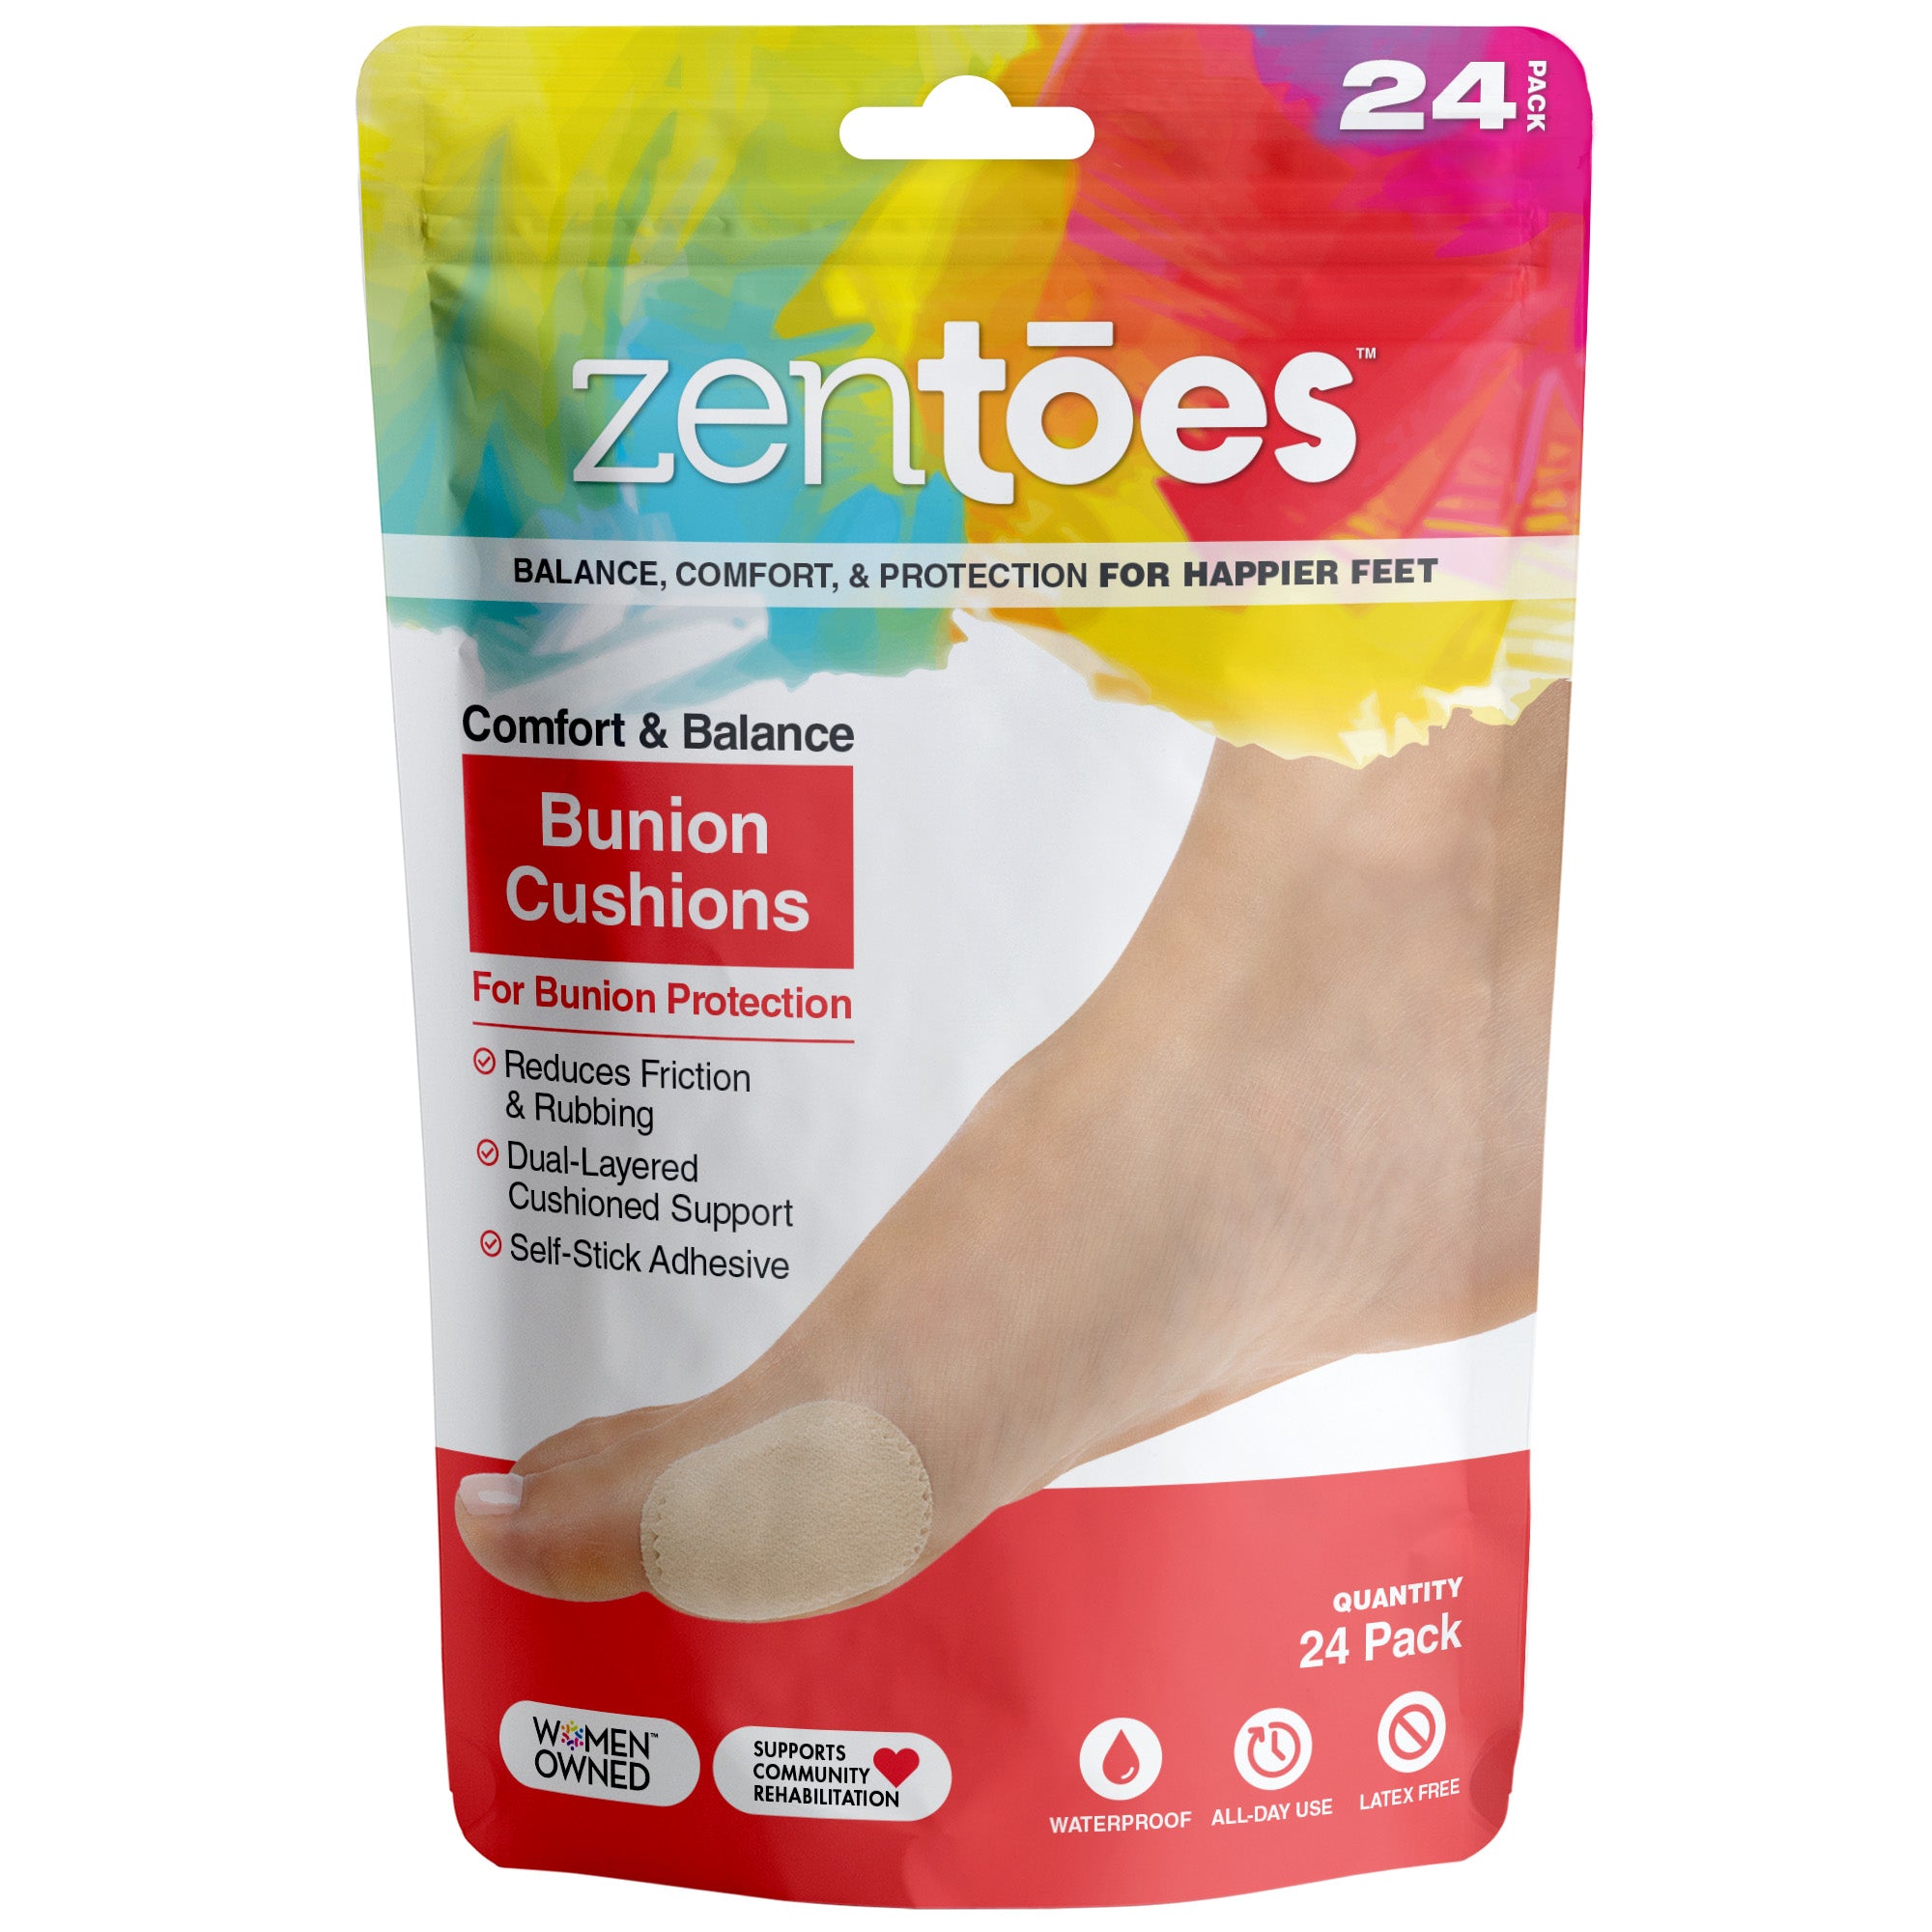 ZenToes U-Shaped Felt Callus Pads | Protect Calluses from Rubbing on Shoes  | Reduce Foot and Heel Pain | Pack of 48 1/8” Self-Stick Pedi Cushions